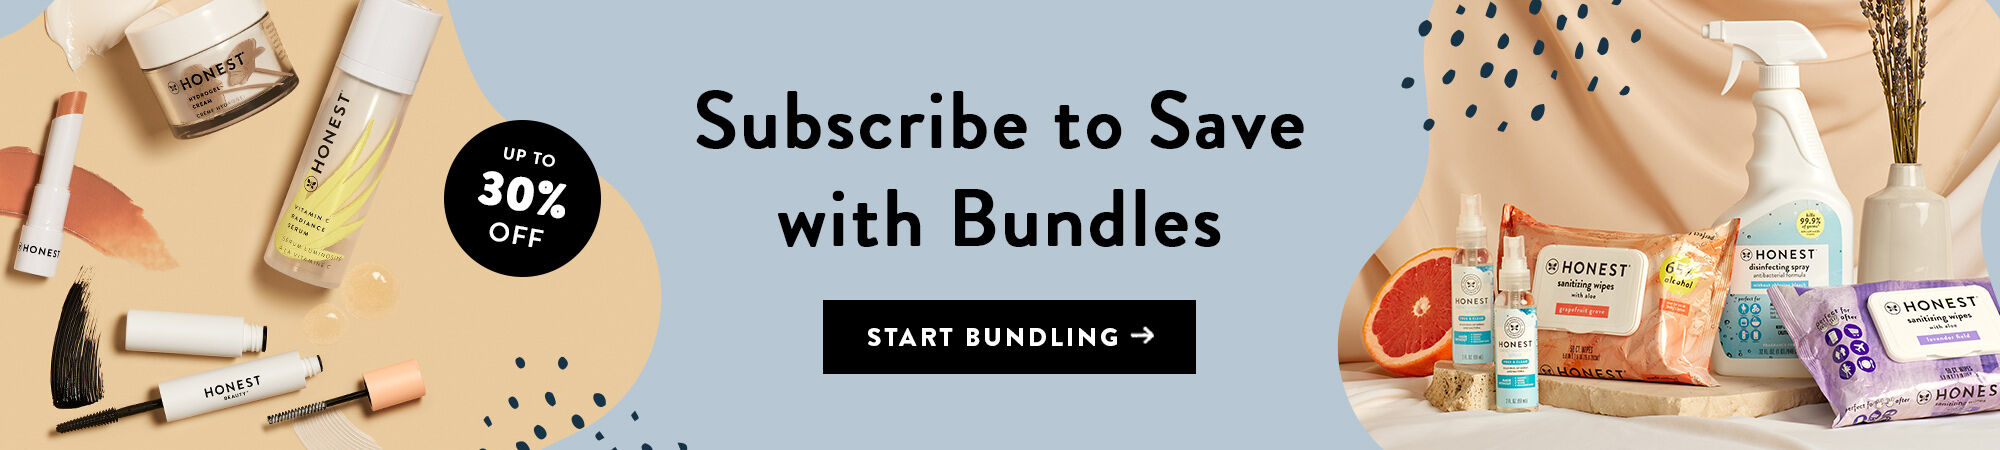 Subscribe to Save with Bundles